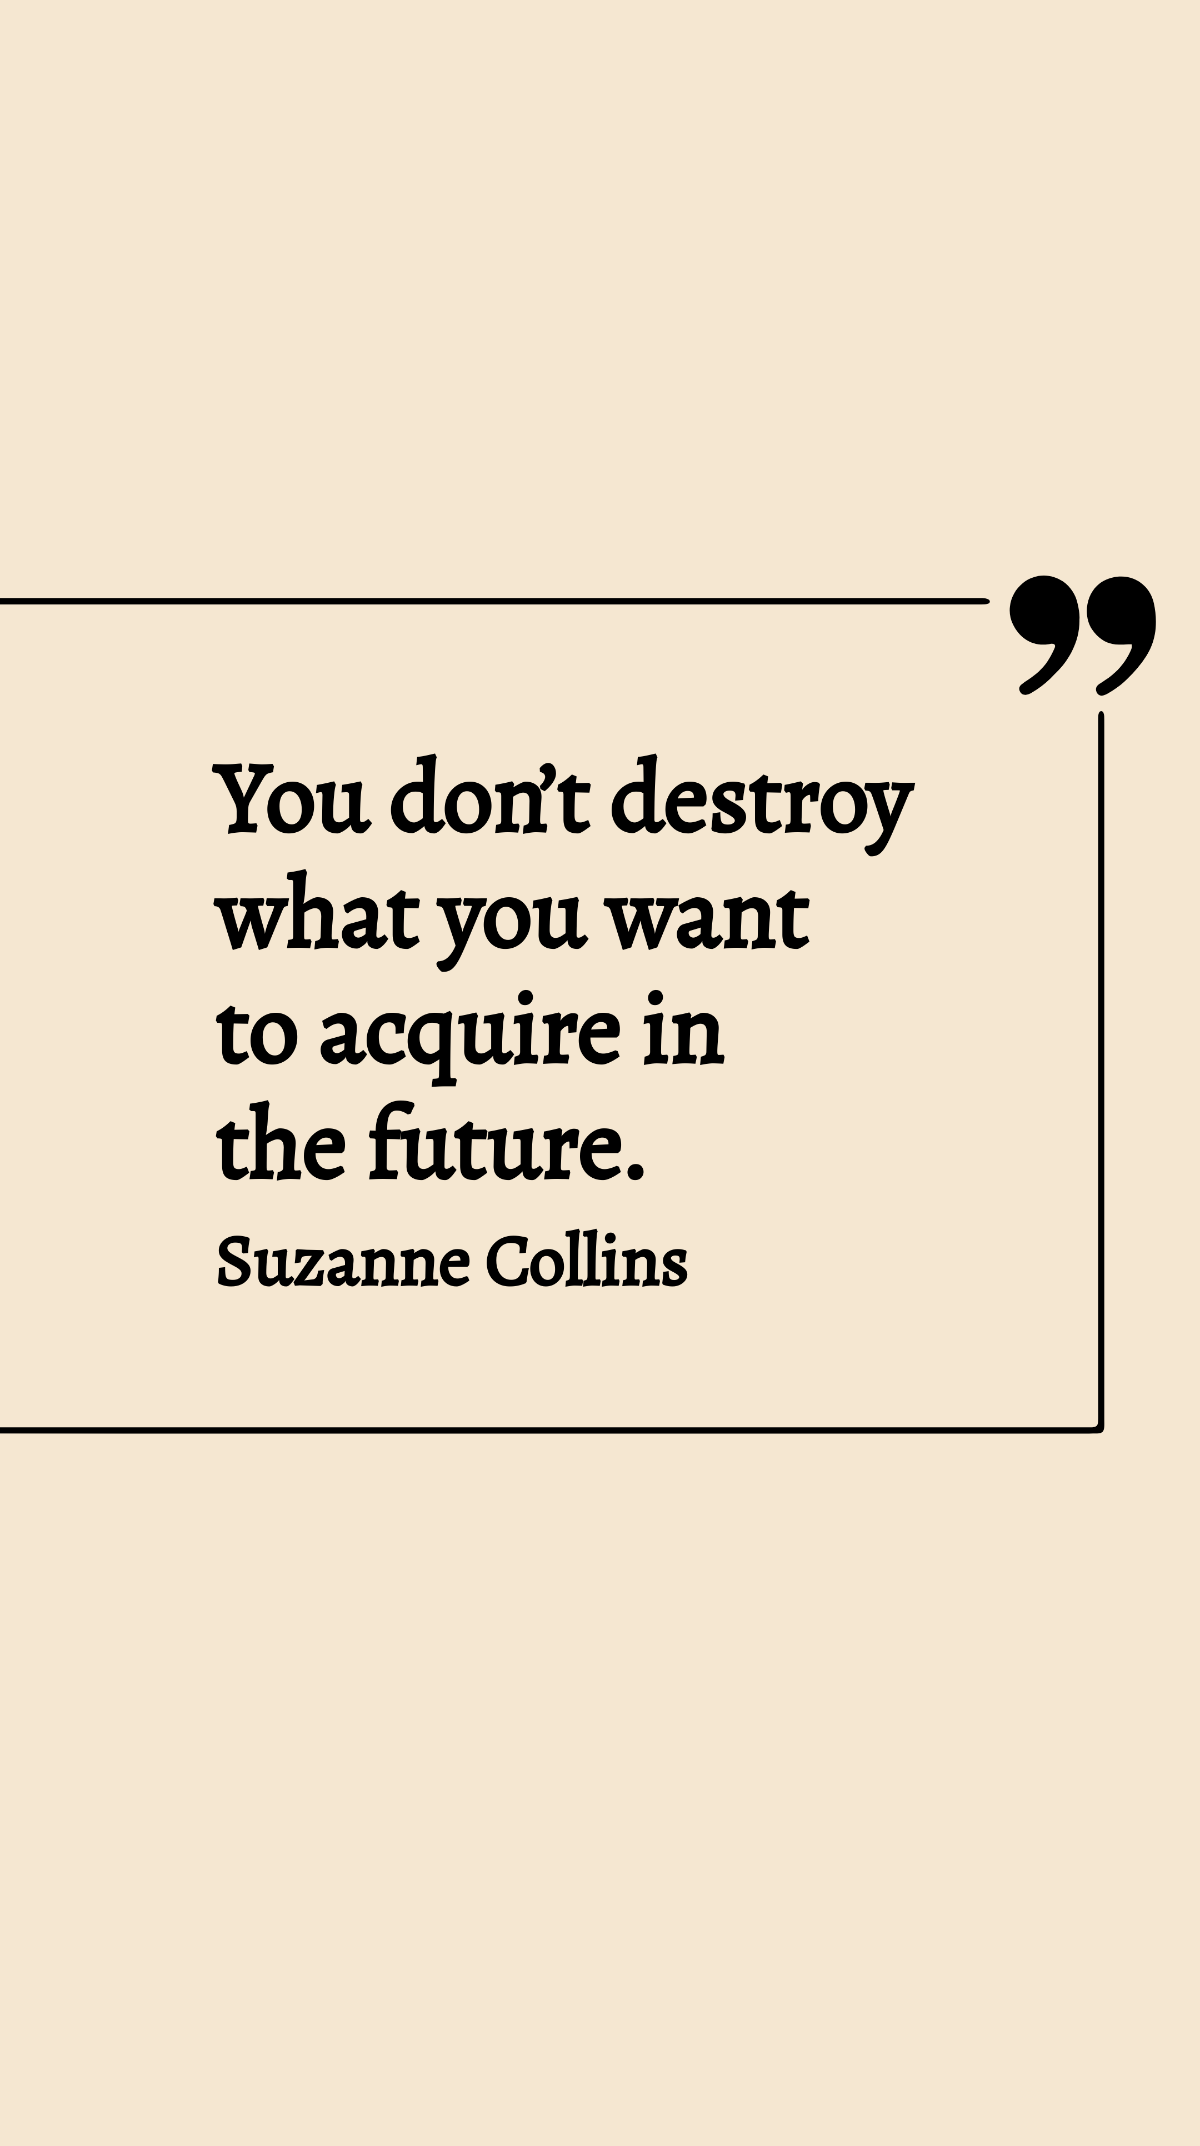 Suzanne Collins - You don’t destroy what you want to acquire in the future. Template